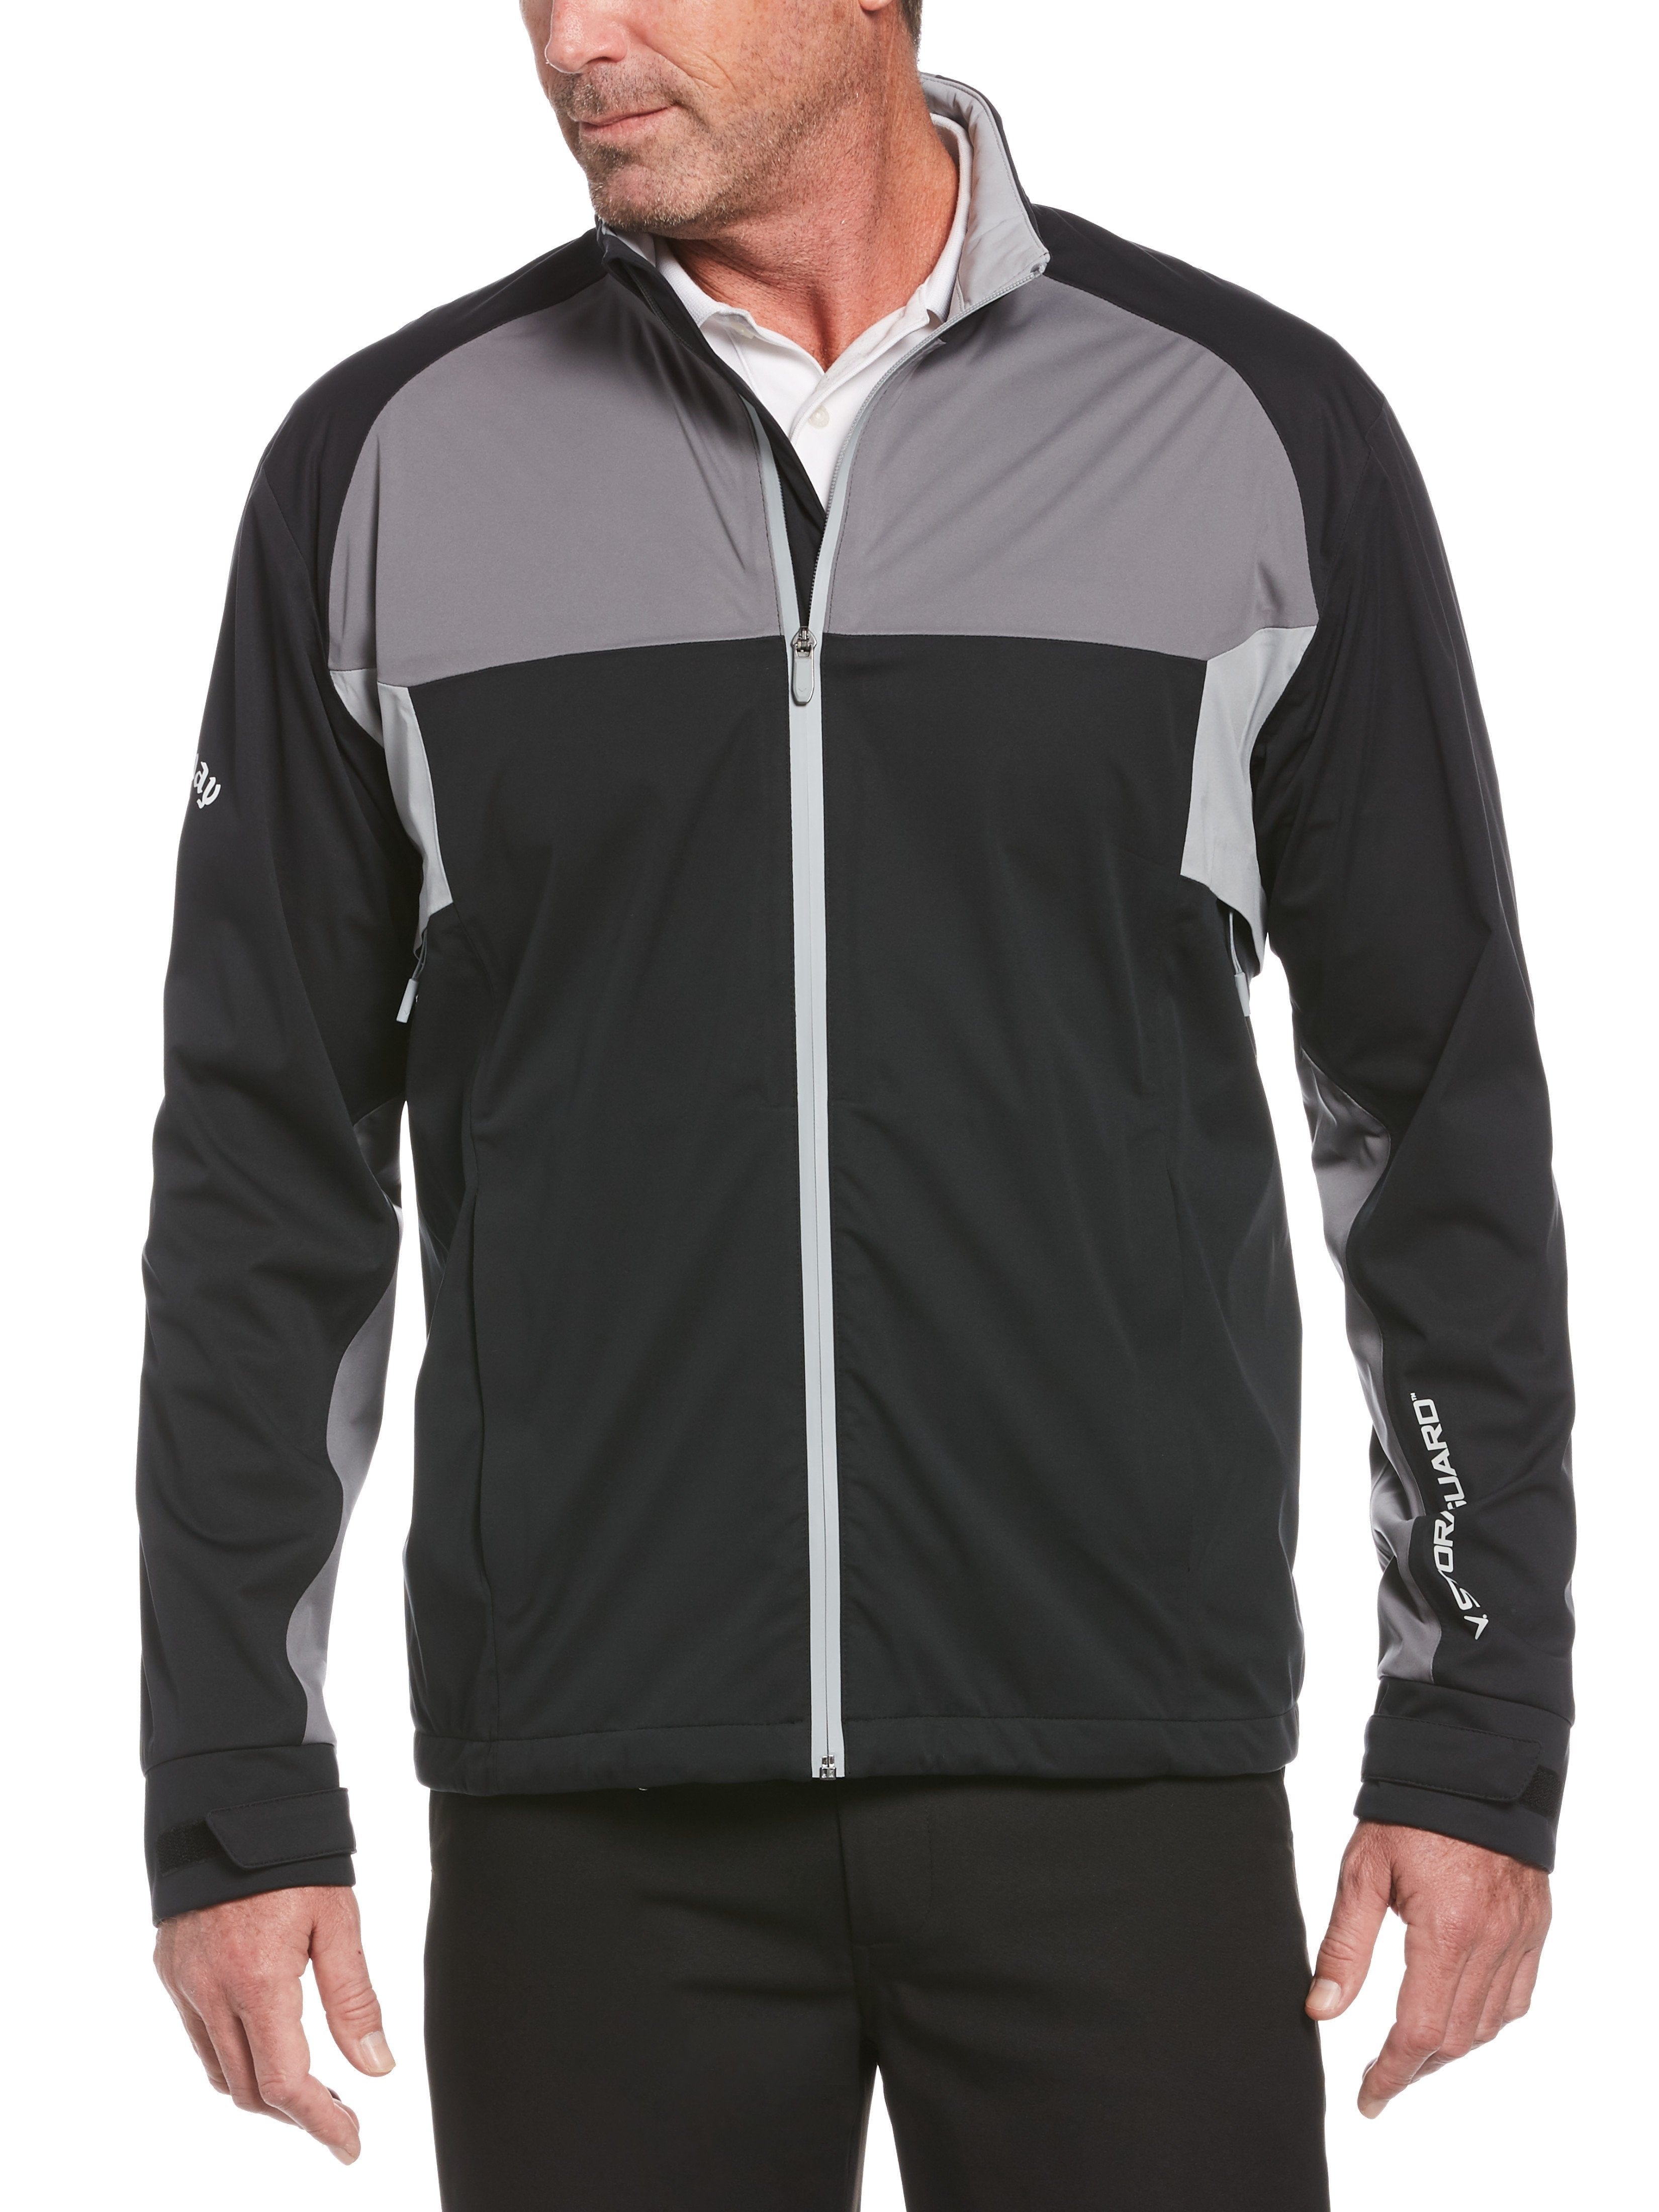 Callaway Apparel Mens Swing Tech™ StormGuard™ Water-Resistant Golf Jacket Top, Size 2XL, Black, Recycled Polyester/Polyester | Golf Apparel Shop